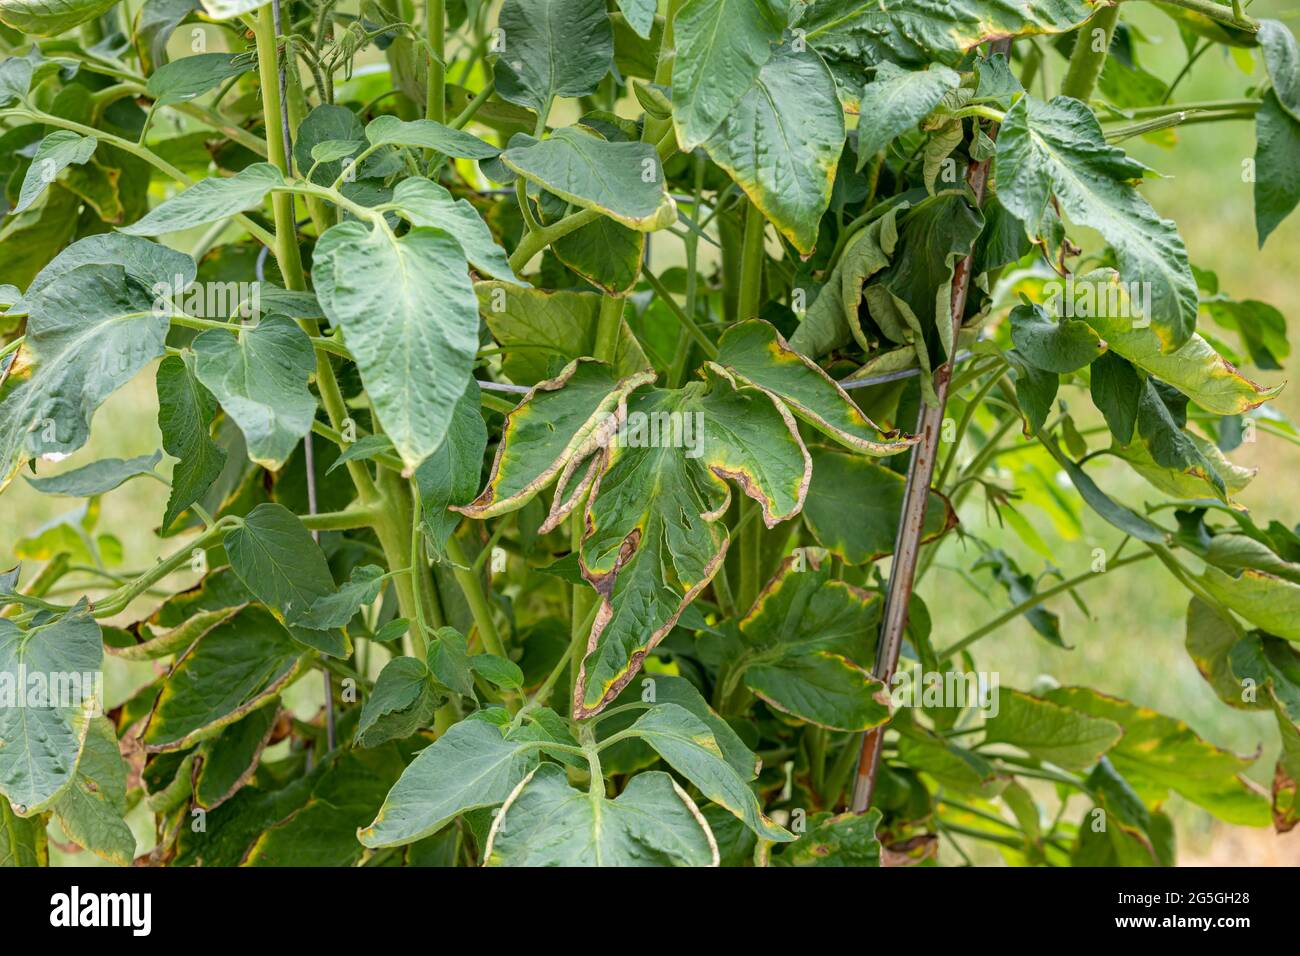 Tomato plant with brown and yellow leaf wilting. Garden, plant health and gardening problems concept Stock Photo